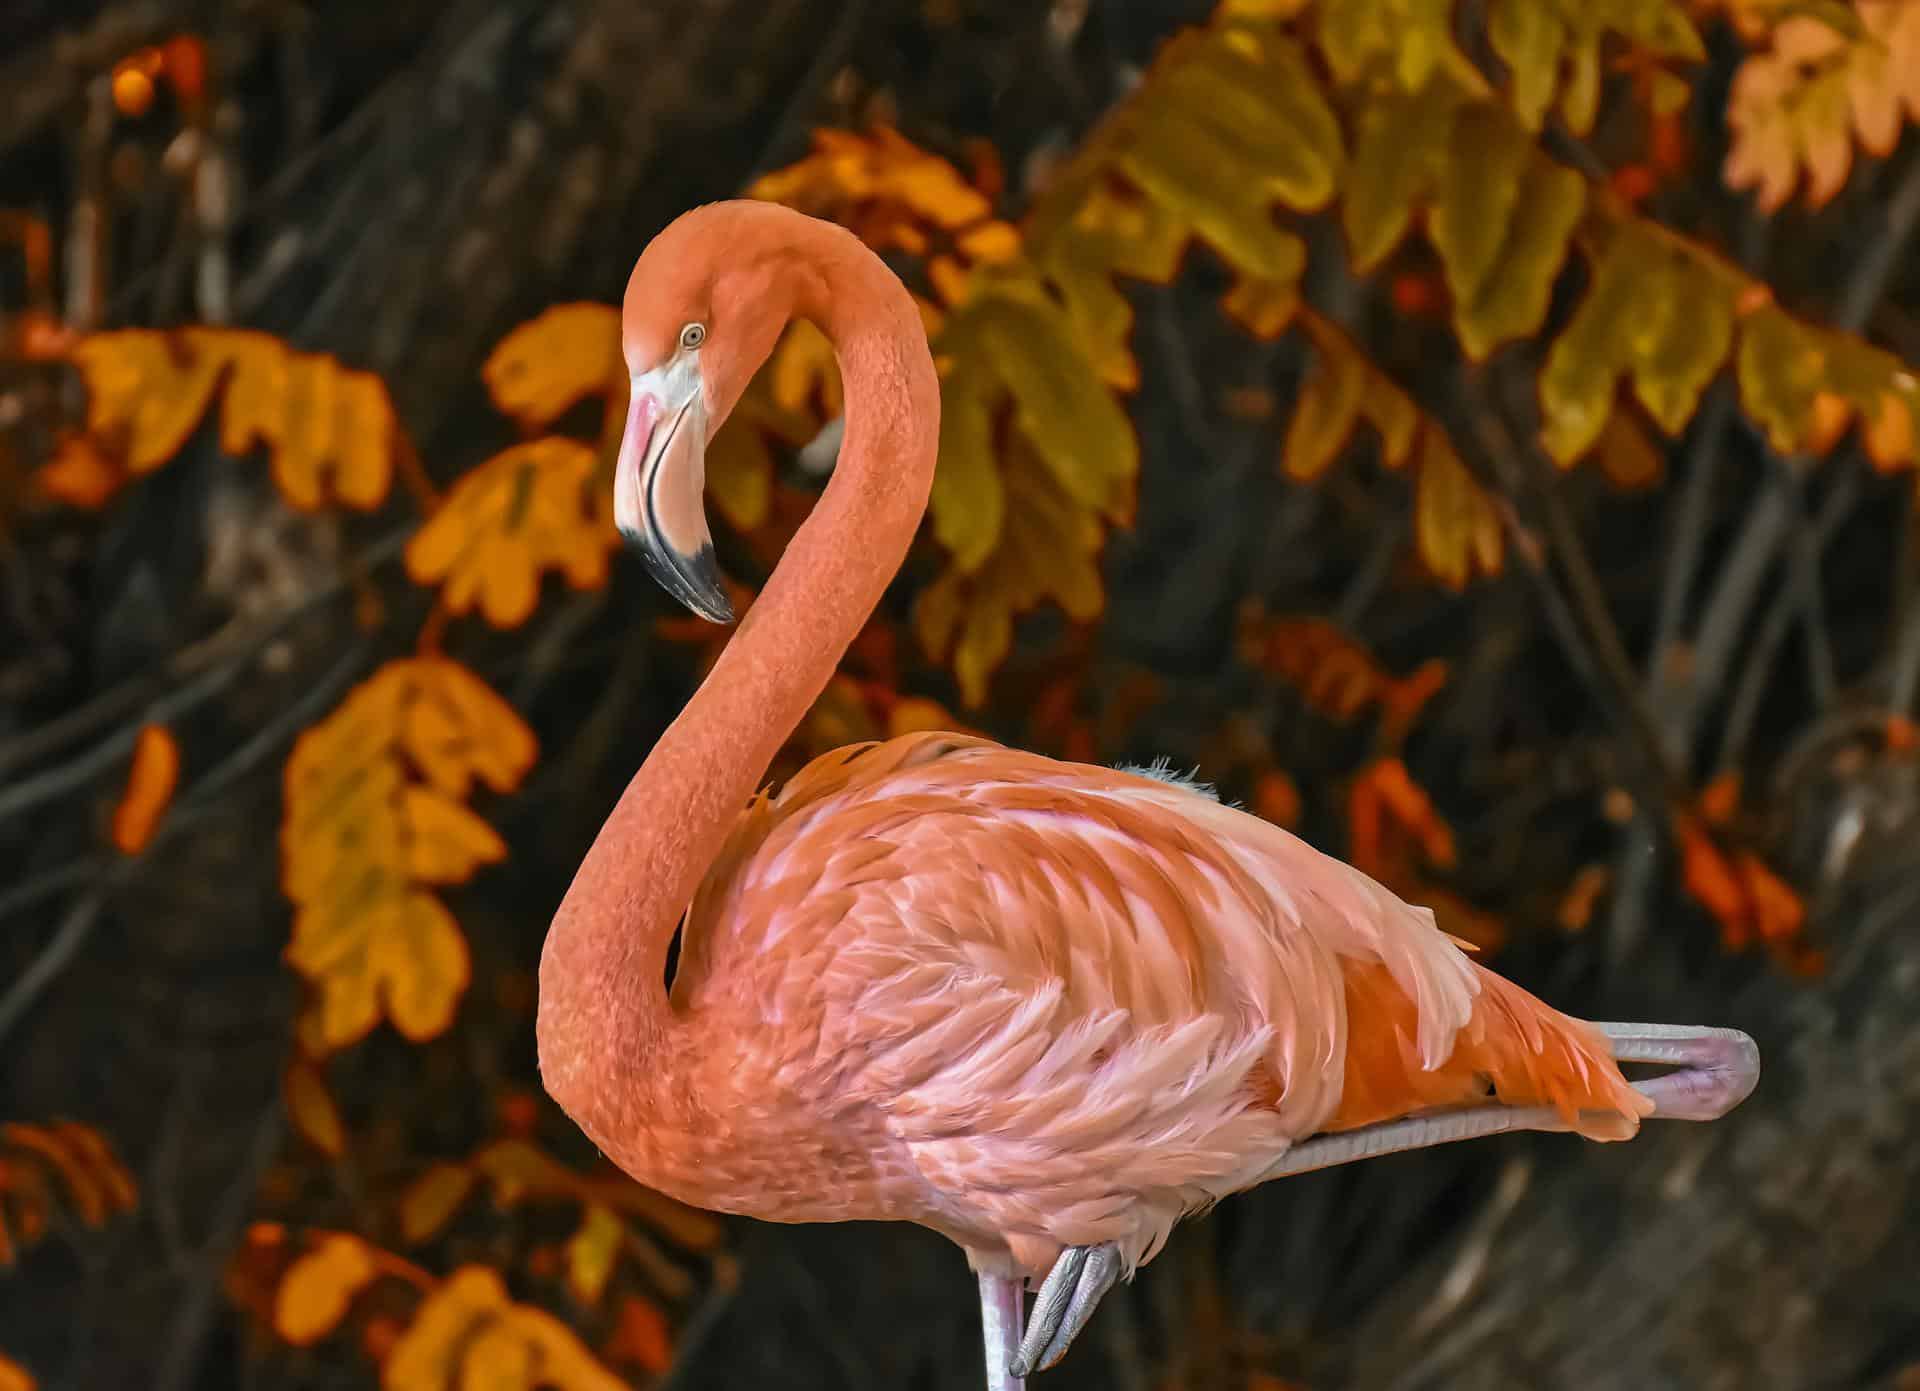 Pet Flamingo | Can You Keep A Flamingo As A Pet? How Much Does A Flamingo Cost?